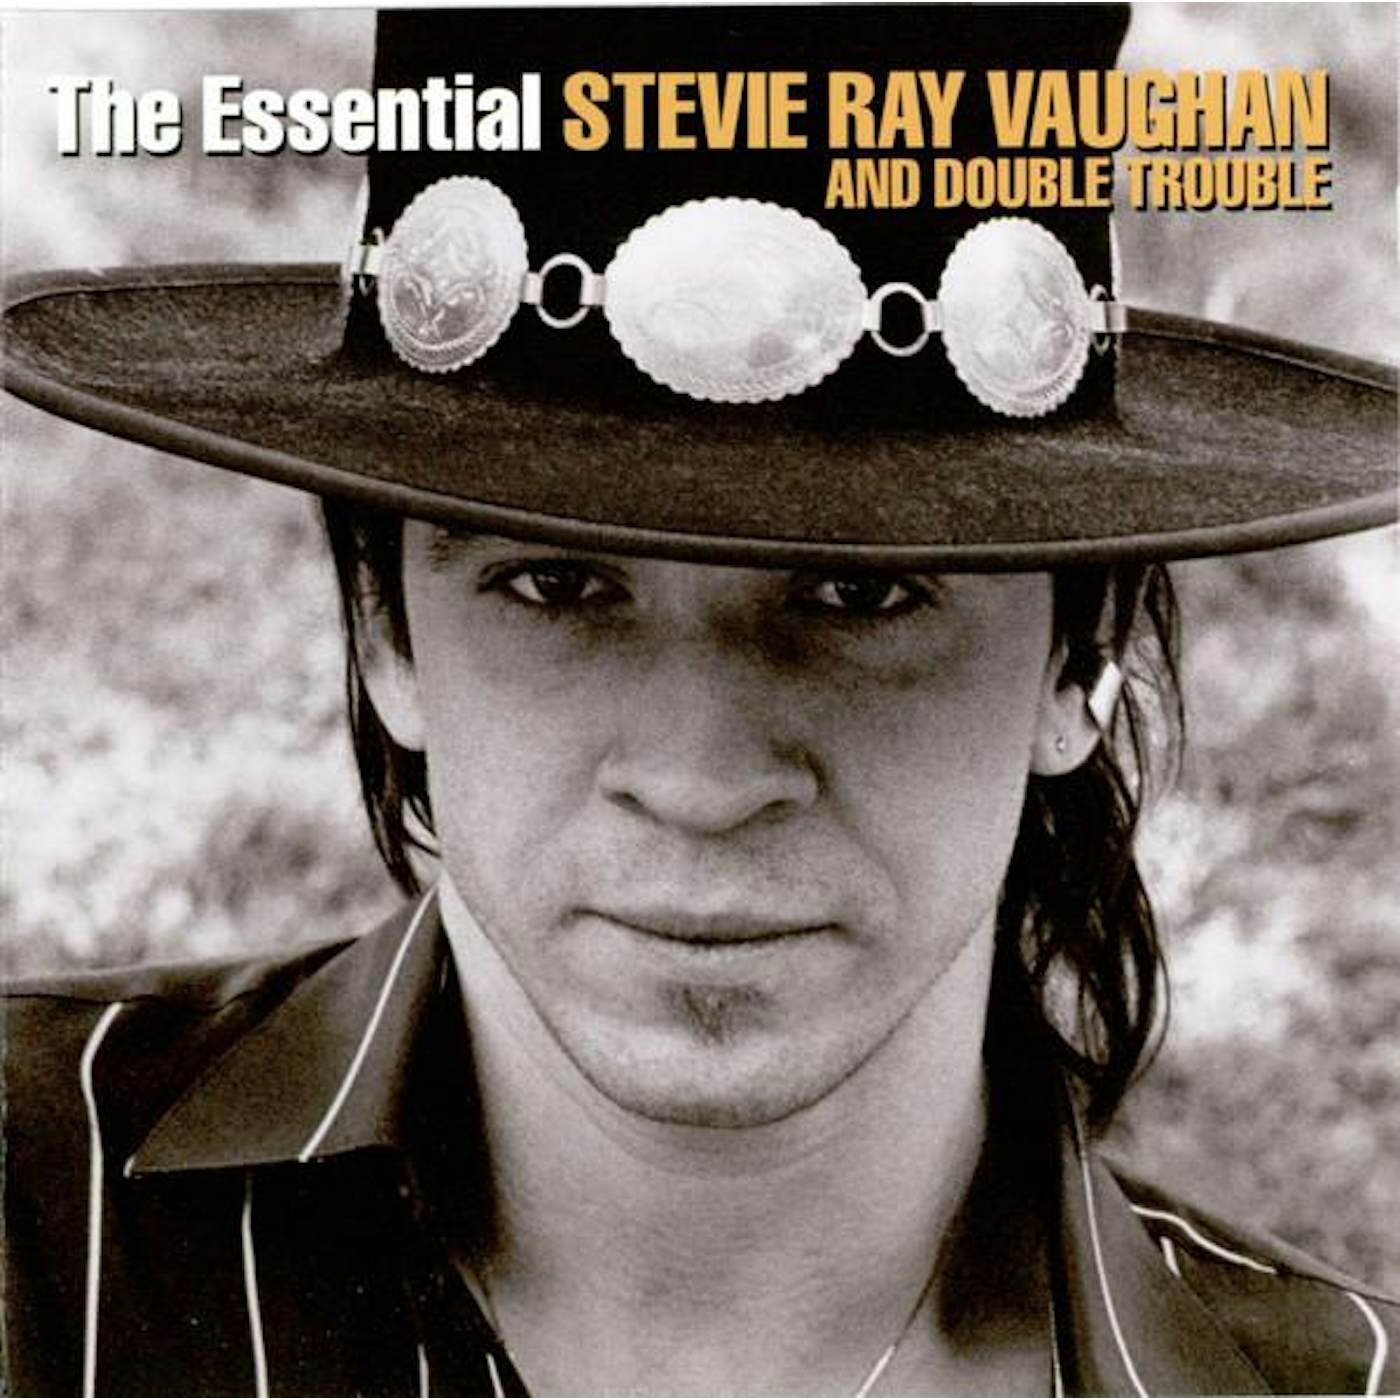 ESSENTIAL STEVIE RAY VAUGHAN AND DOUBLE TROUBL CD